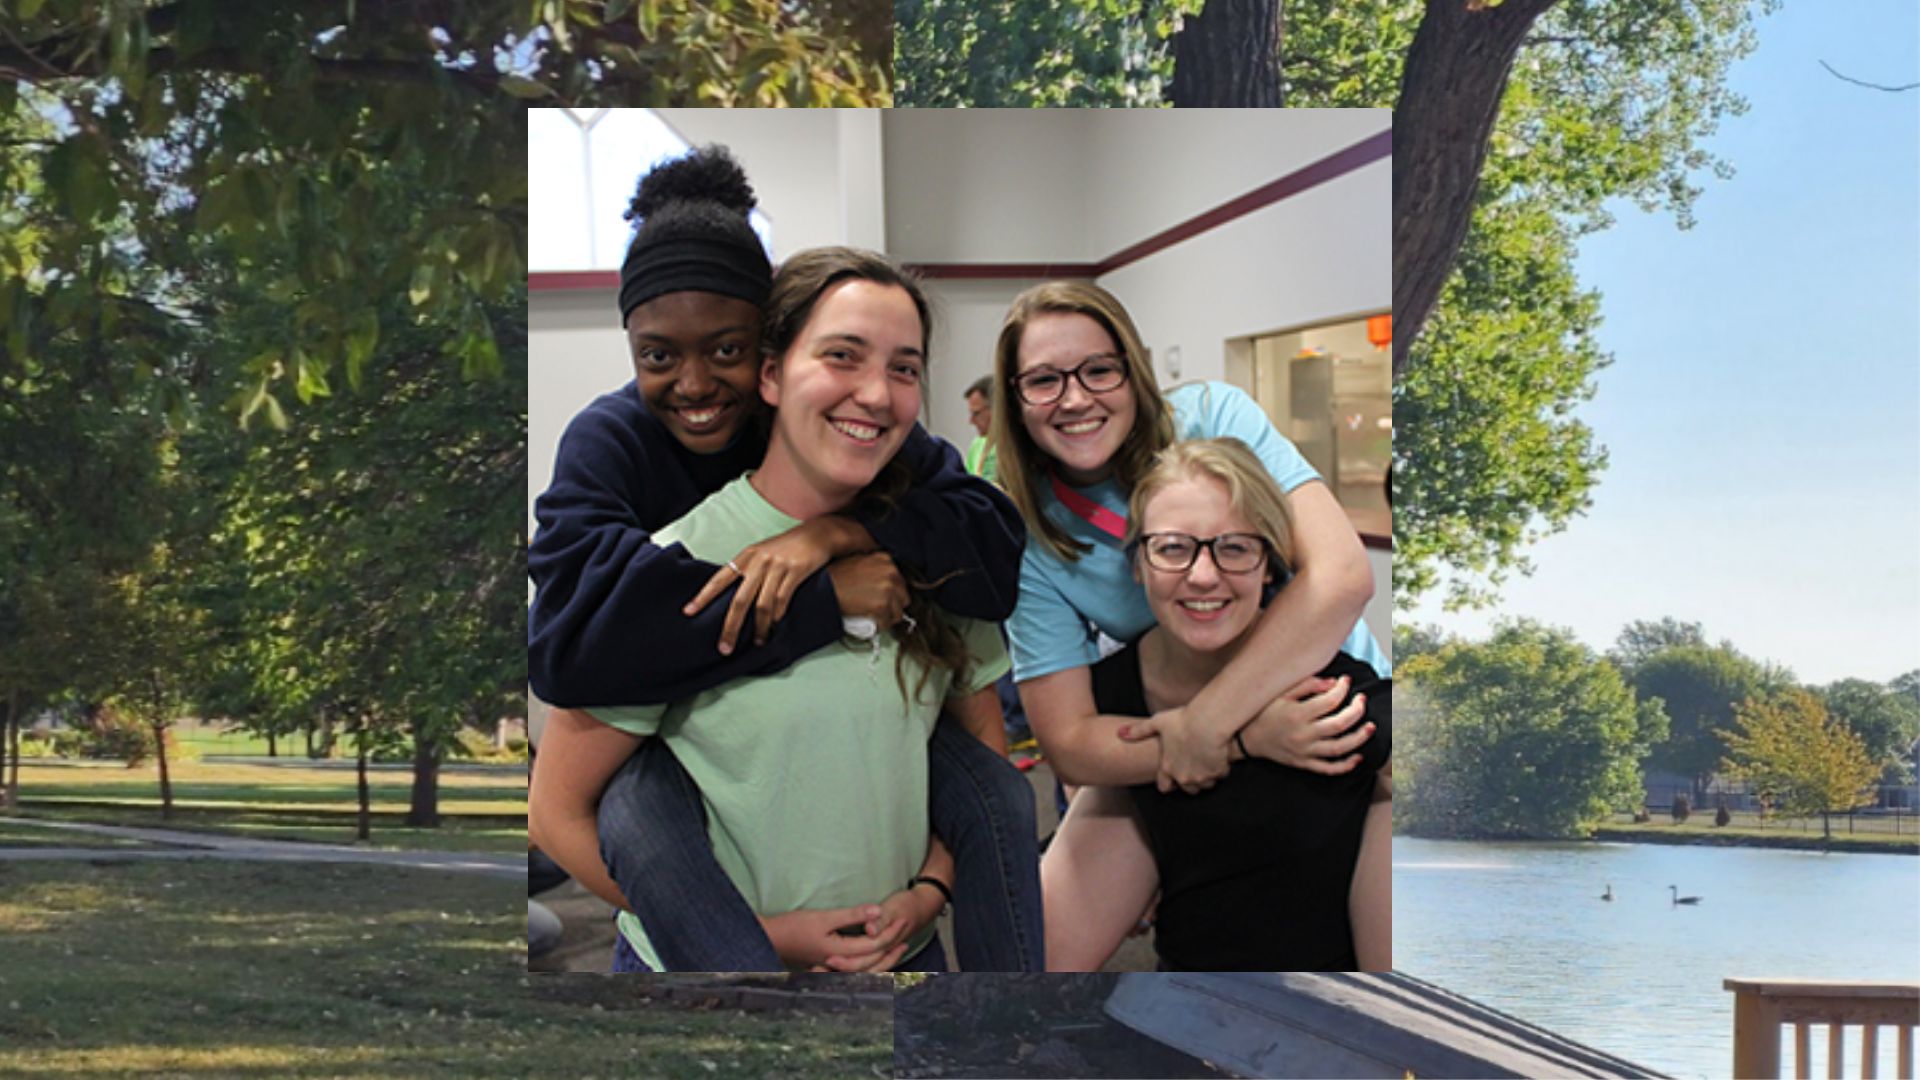 Four female Newman students (two piggy backing on the other two) smile on a spiritual retreat.